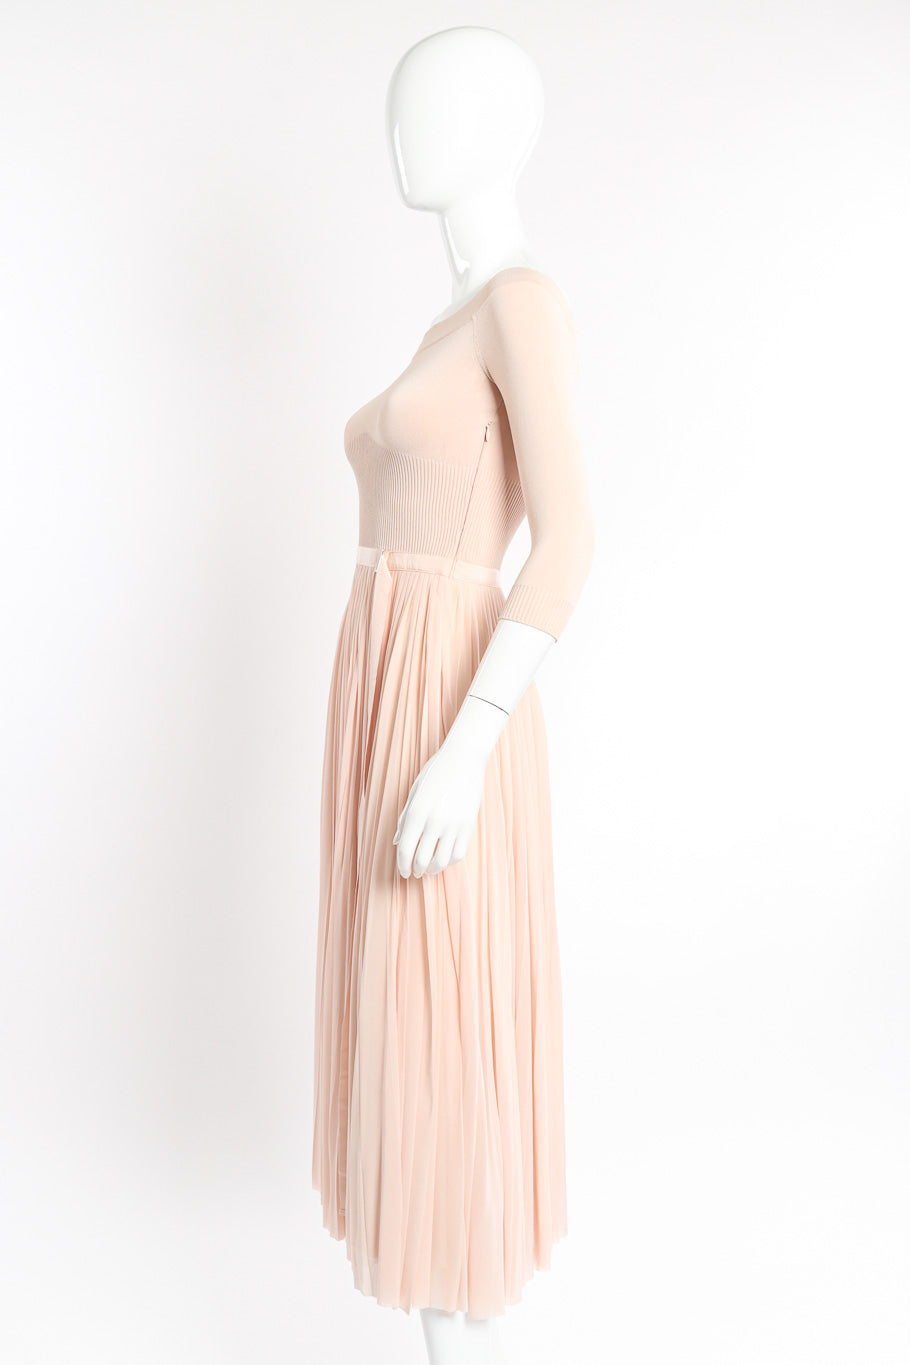 Alexander McQueen Off-The-Shoulder Pleated Knit Dress side view on mannequin @recessla